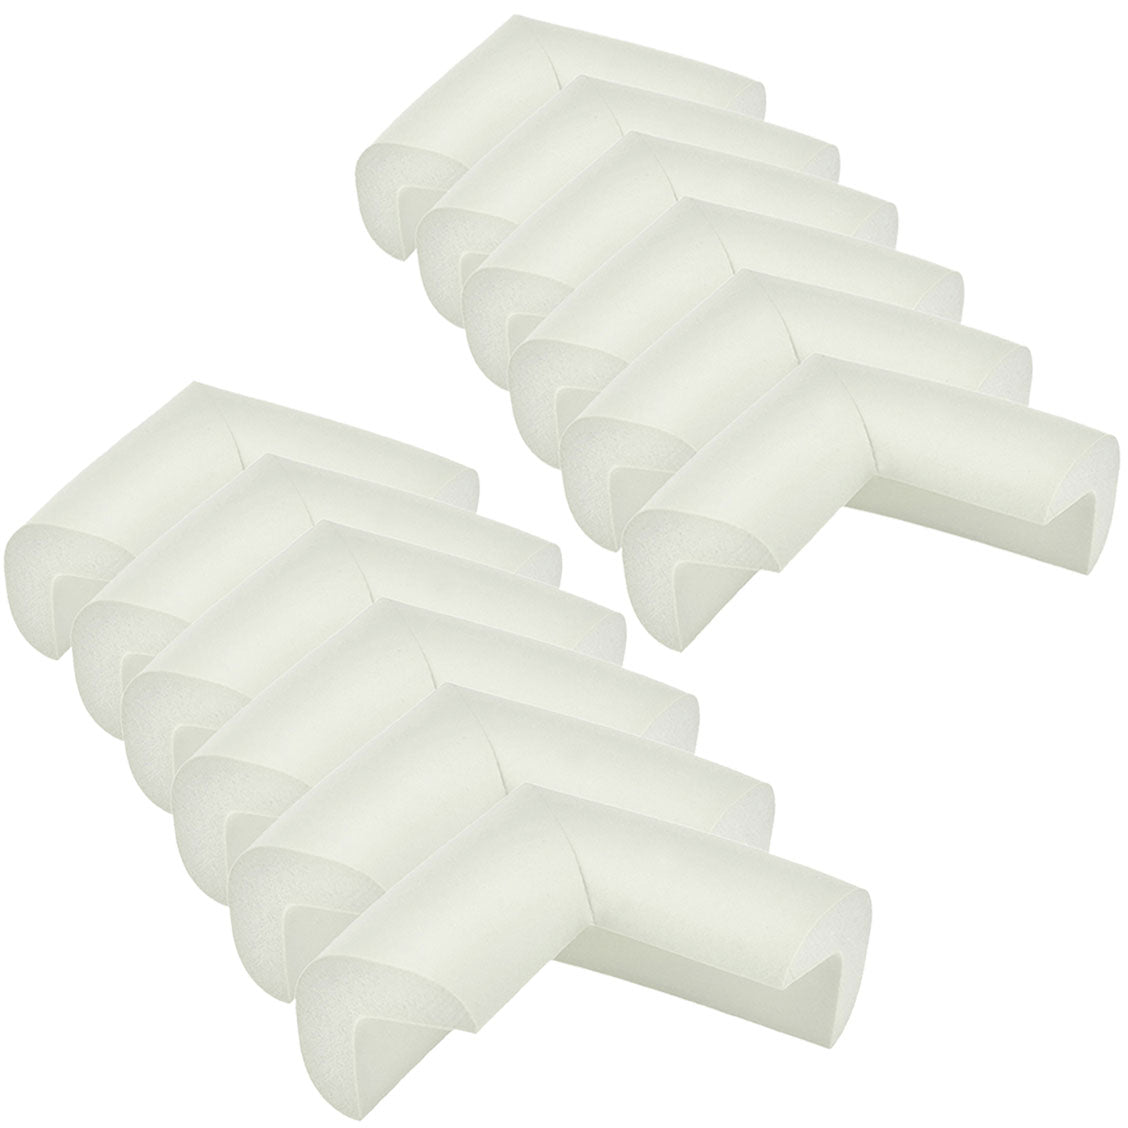 Corner Protector for Baby, Baby Safety Edge Corner Guards